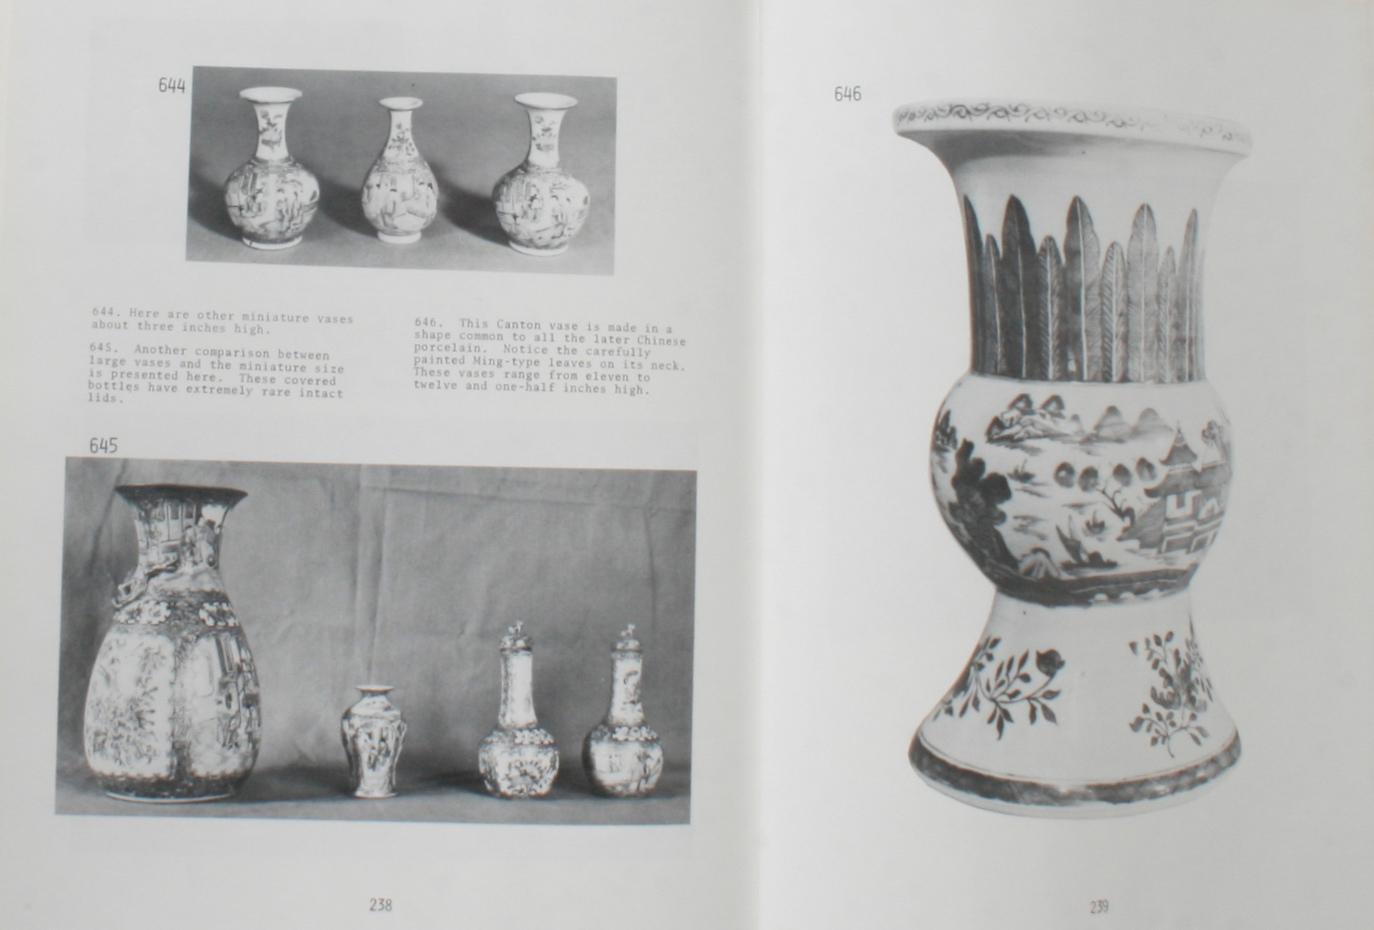 20th Century Chinese Export Porcelain, Standard Patterns and Forms, 1780-1880, First Edition For Sale